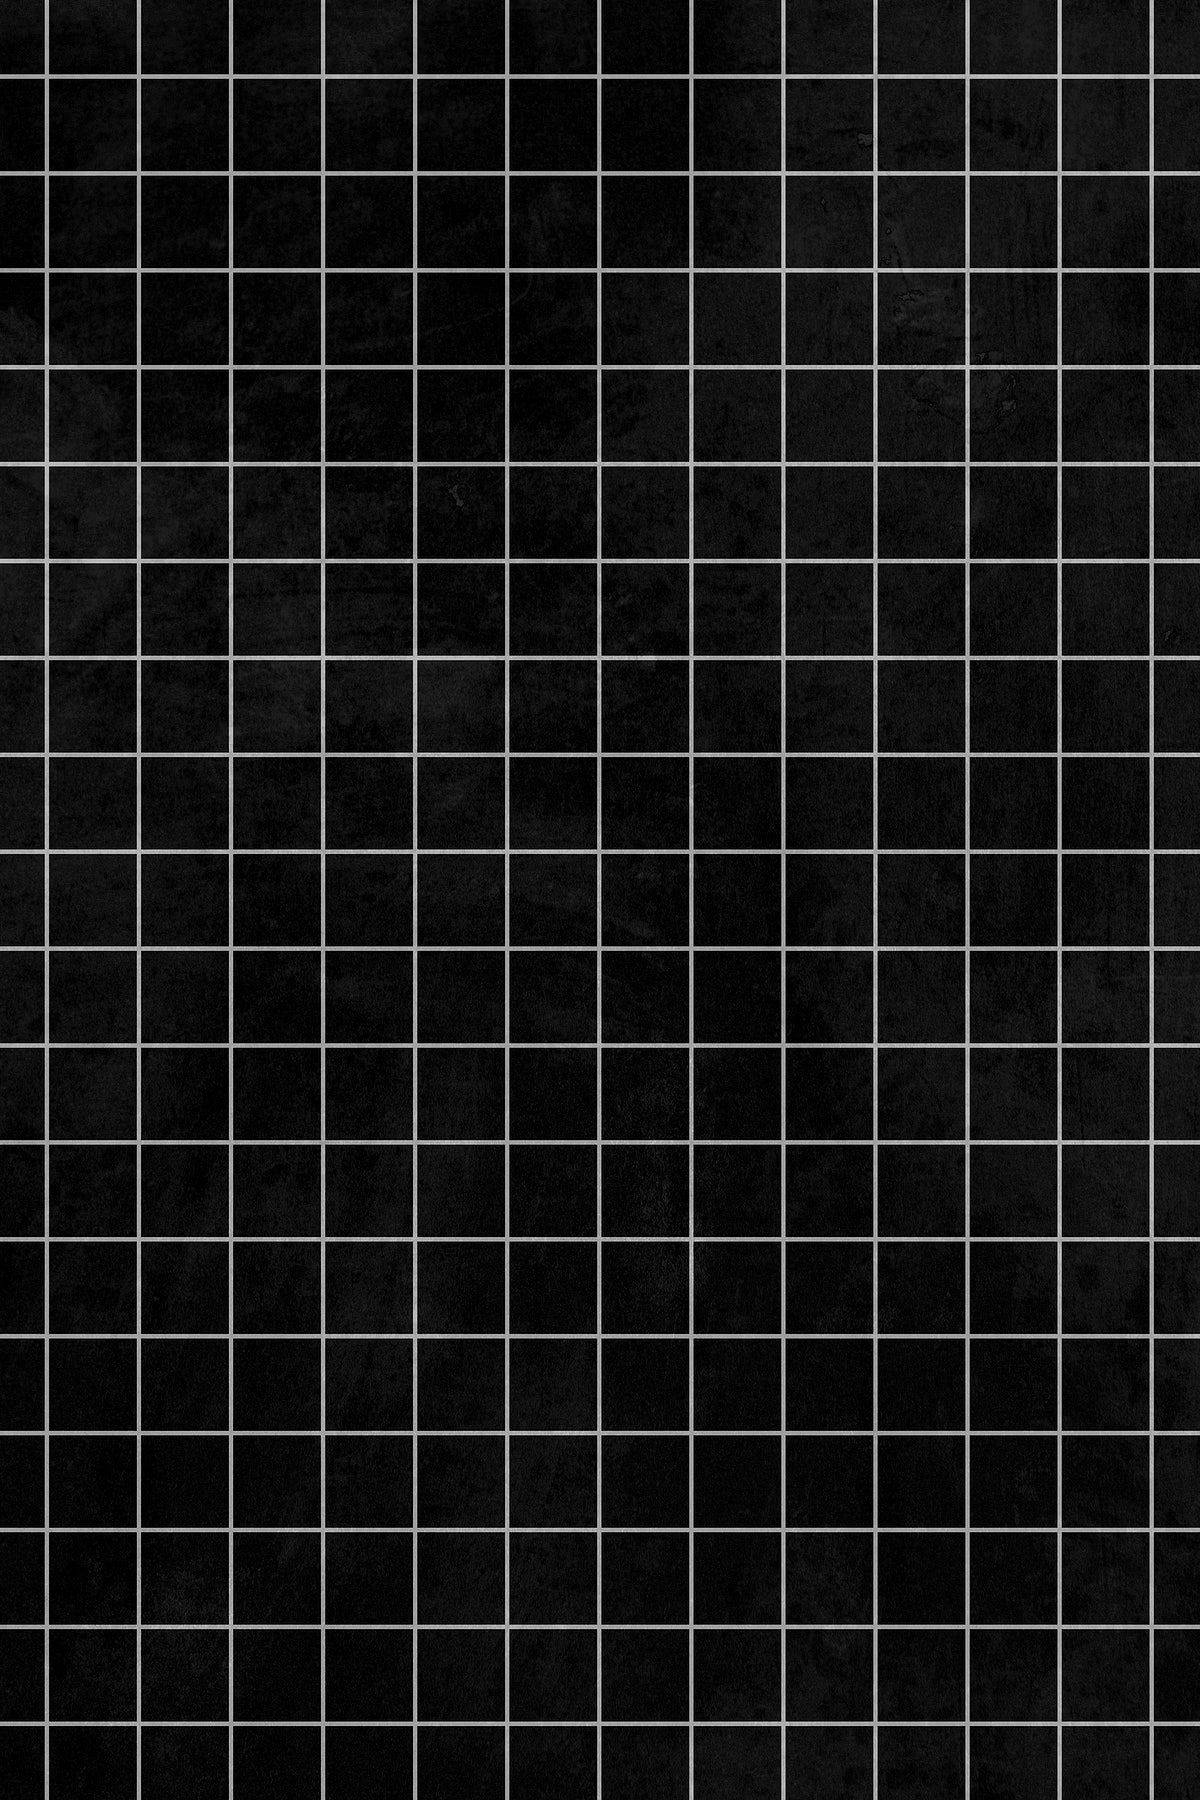 Black and white grid pattern wallpaper. - Grid